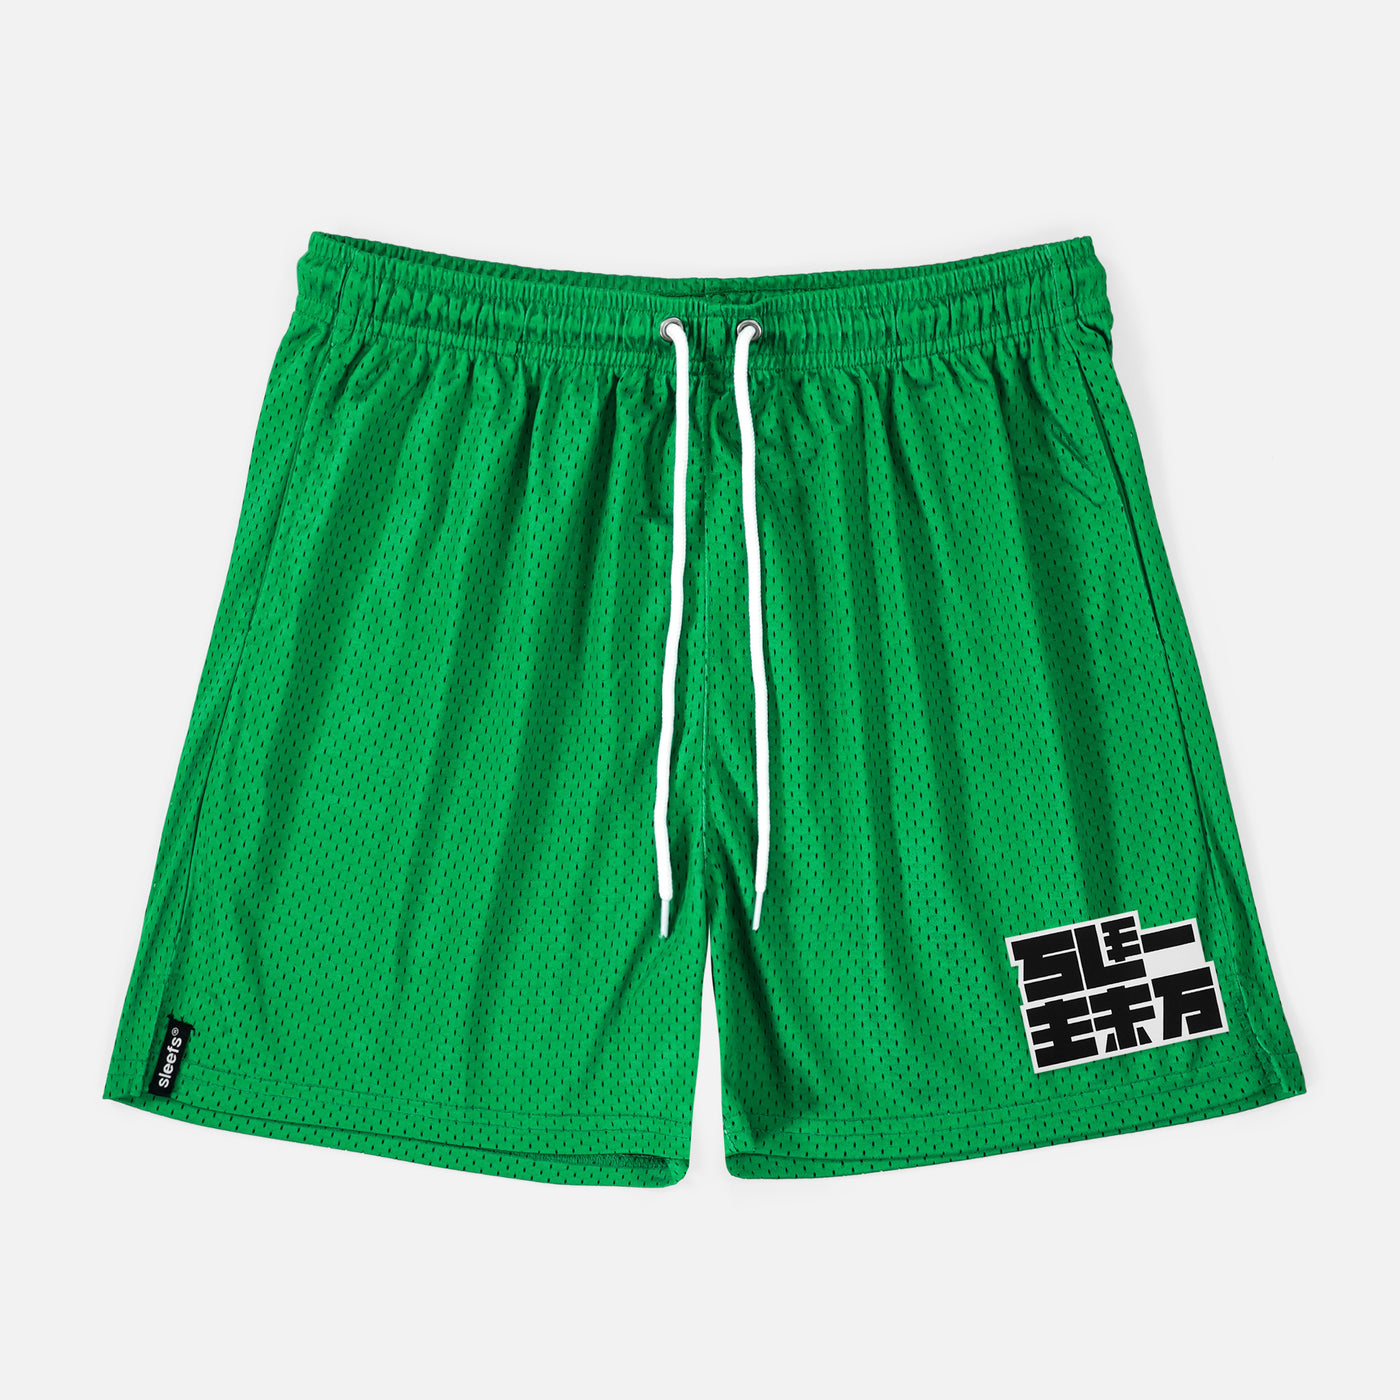 Sleefs Asia Patch Shorts - 7"